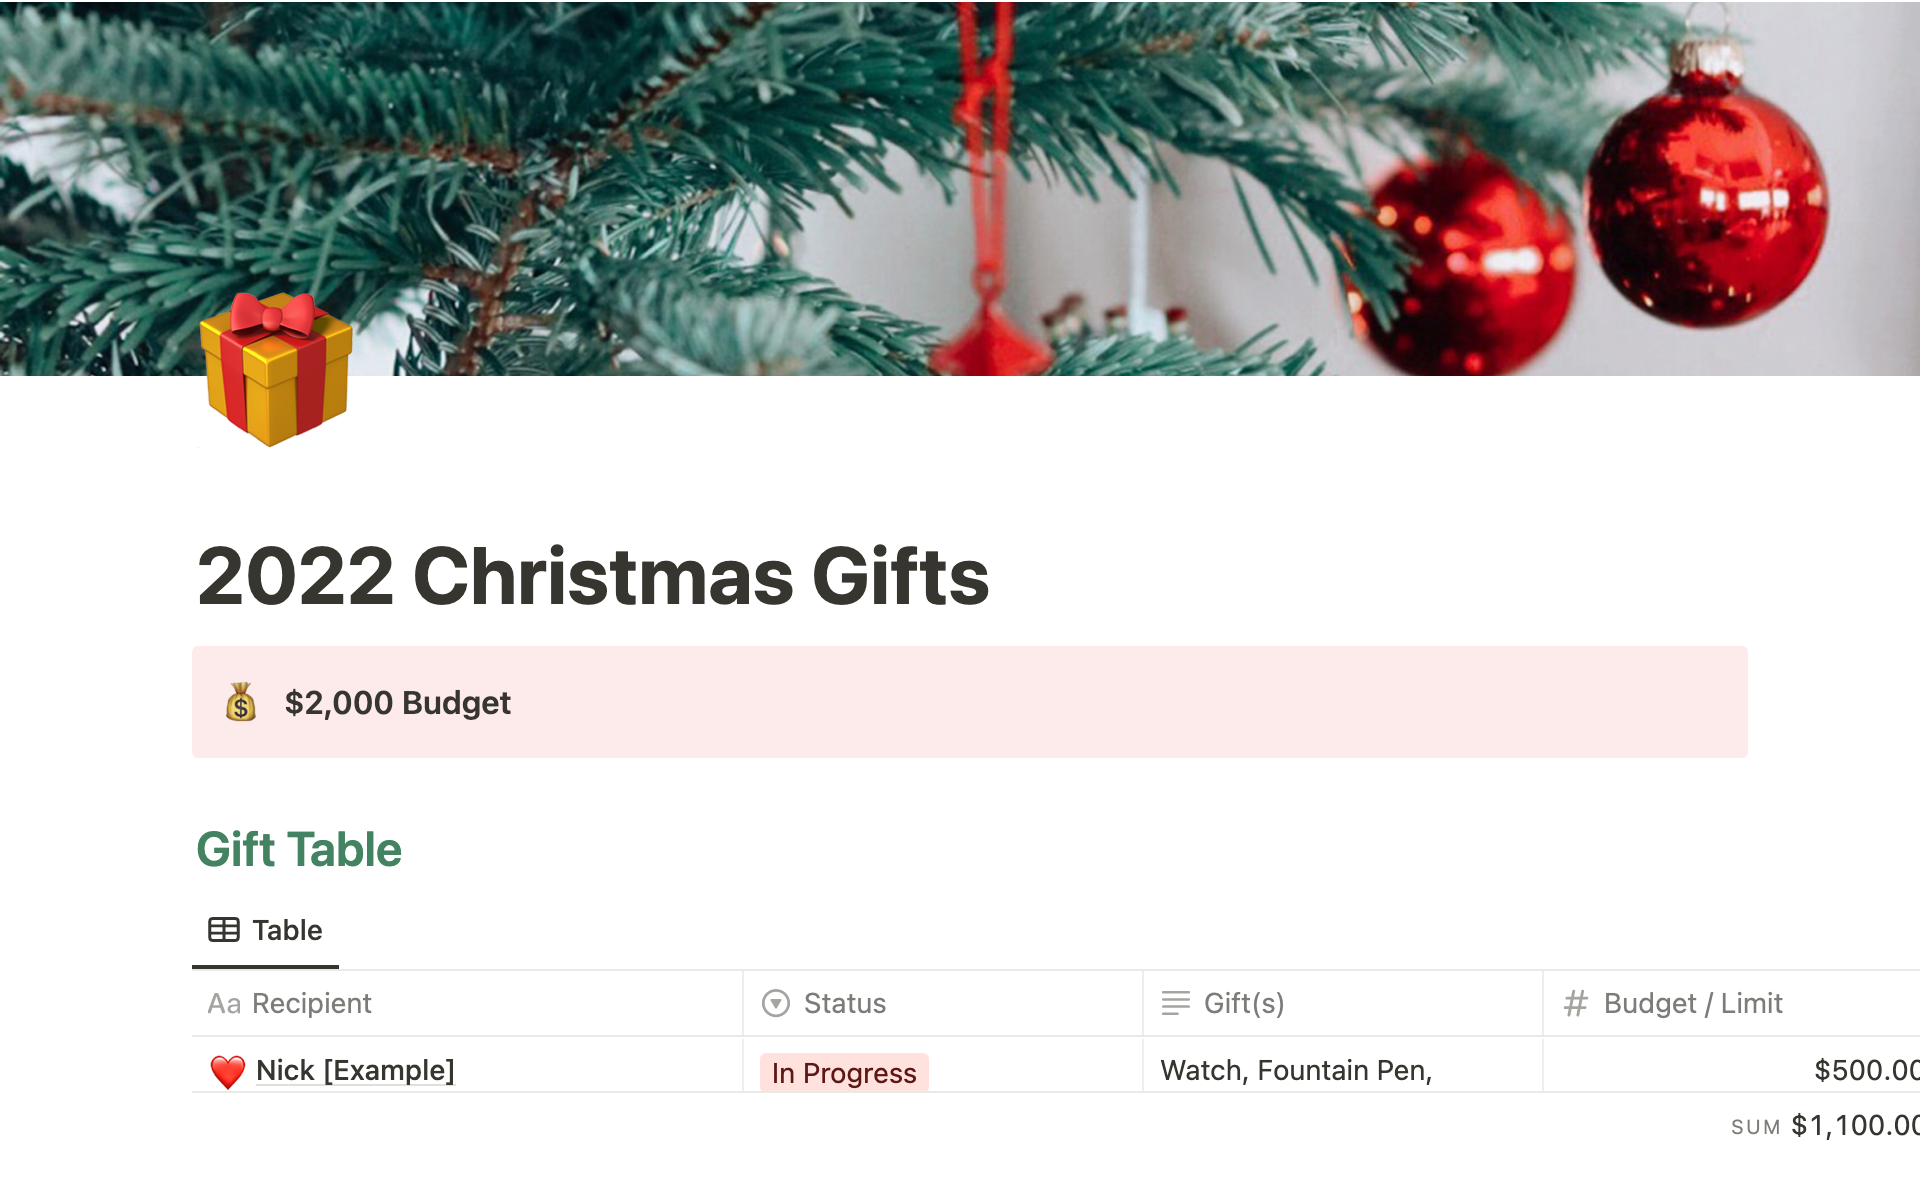 Use this Notion Template from Jaime's Creations to brainstorm gift ideas, track purchases & shipments, and manage your holiday shopping budget.